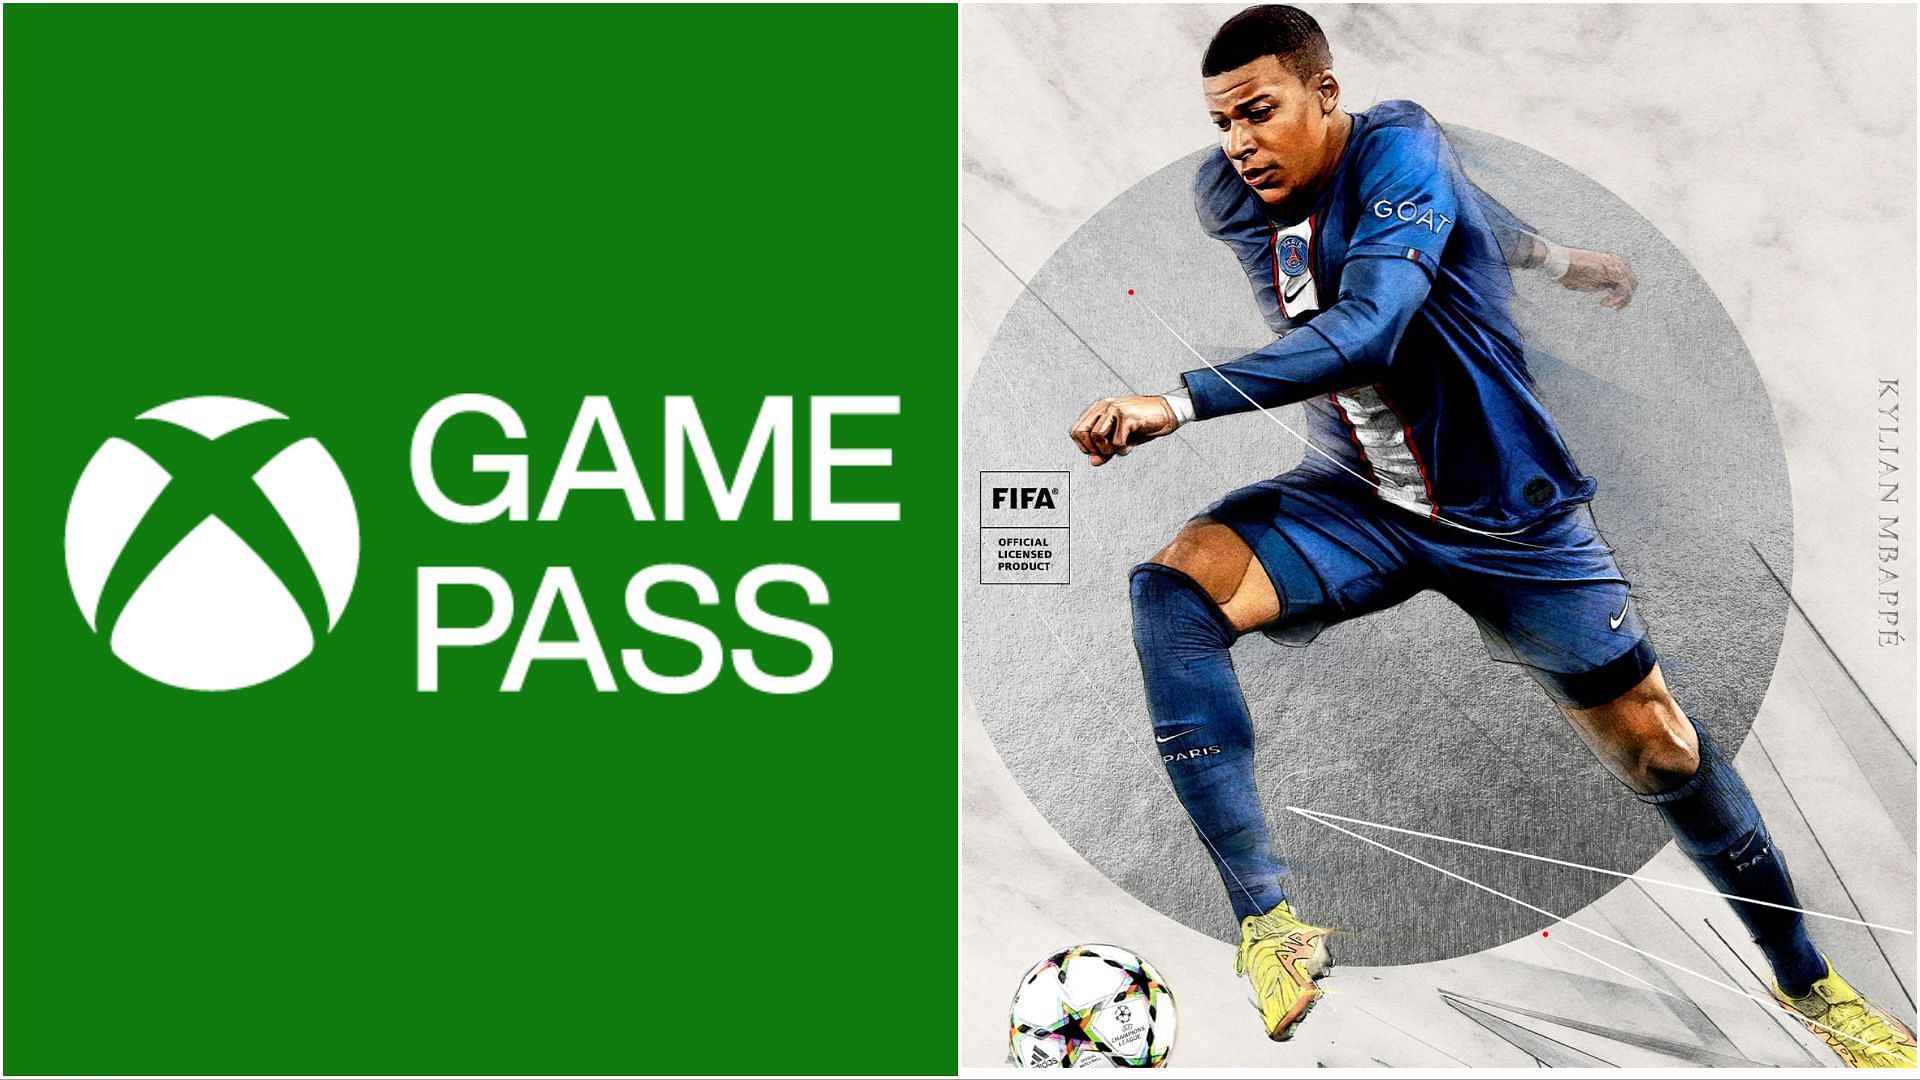 FIFA 23 joins Xbox Game Pass Ultimate on May 16 as part of EA Play